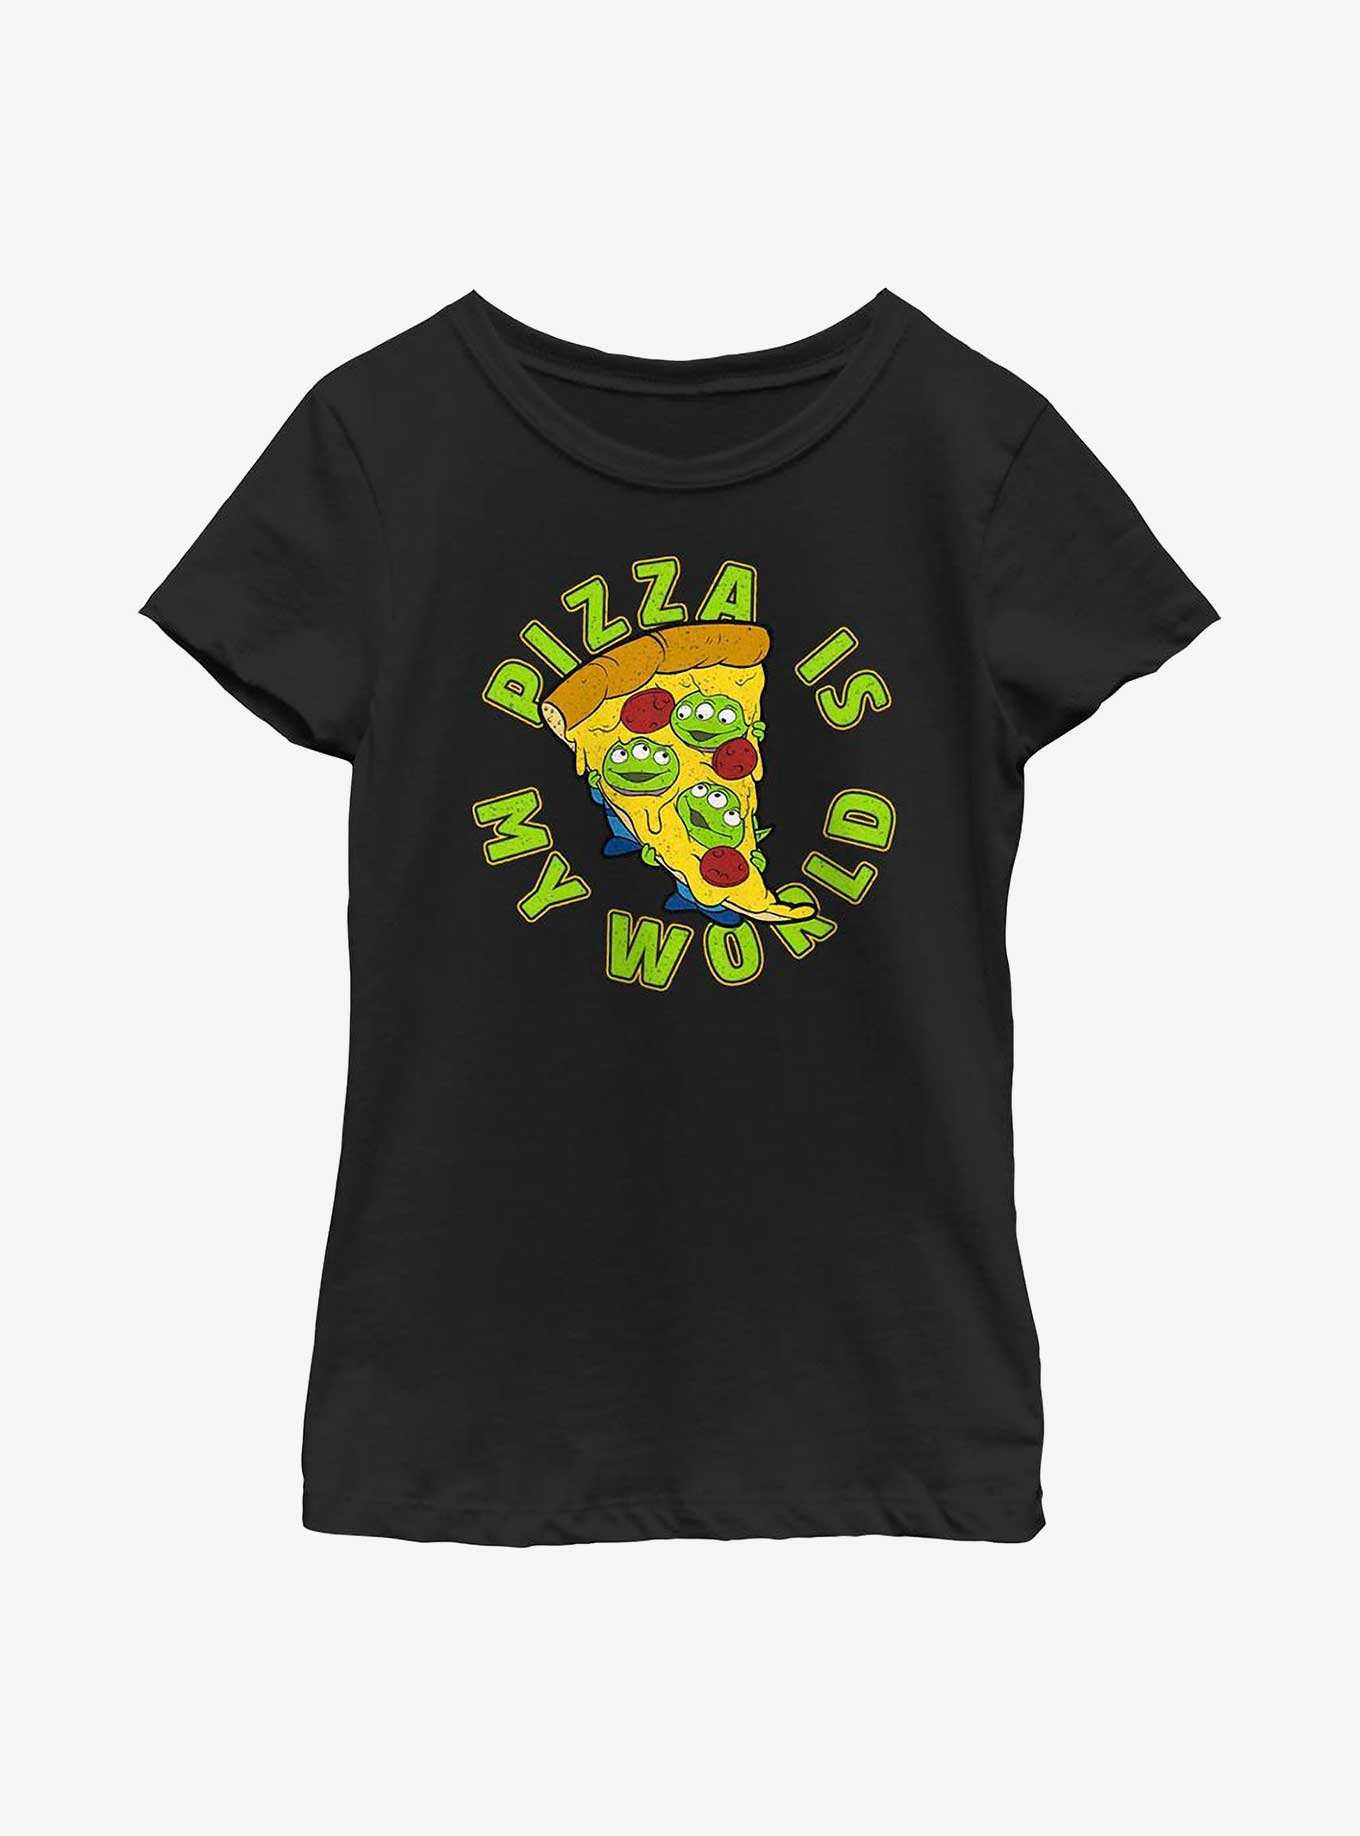 Disney Pixar Toy Story Pizza Is My World Youth Girls T-Shirt, , hi-res